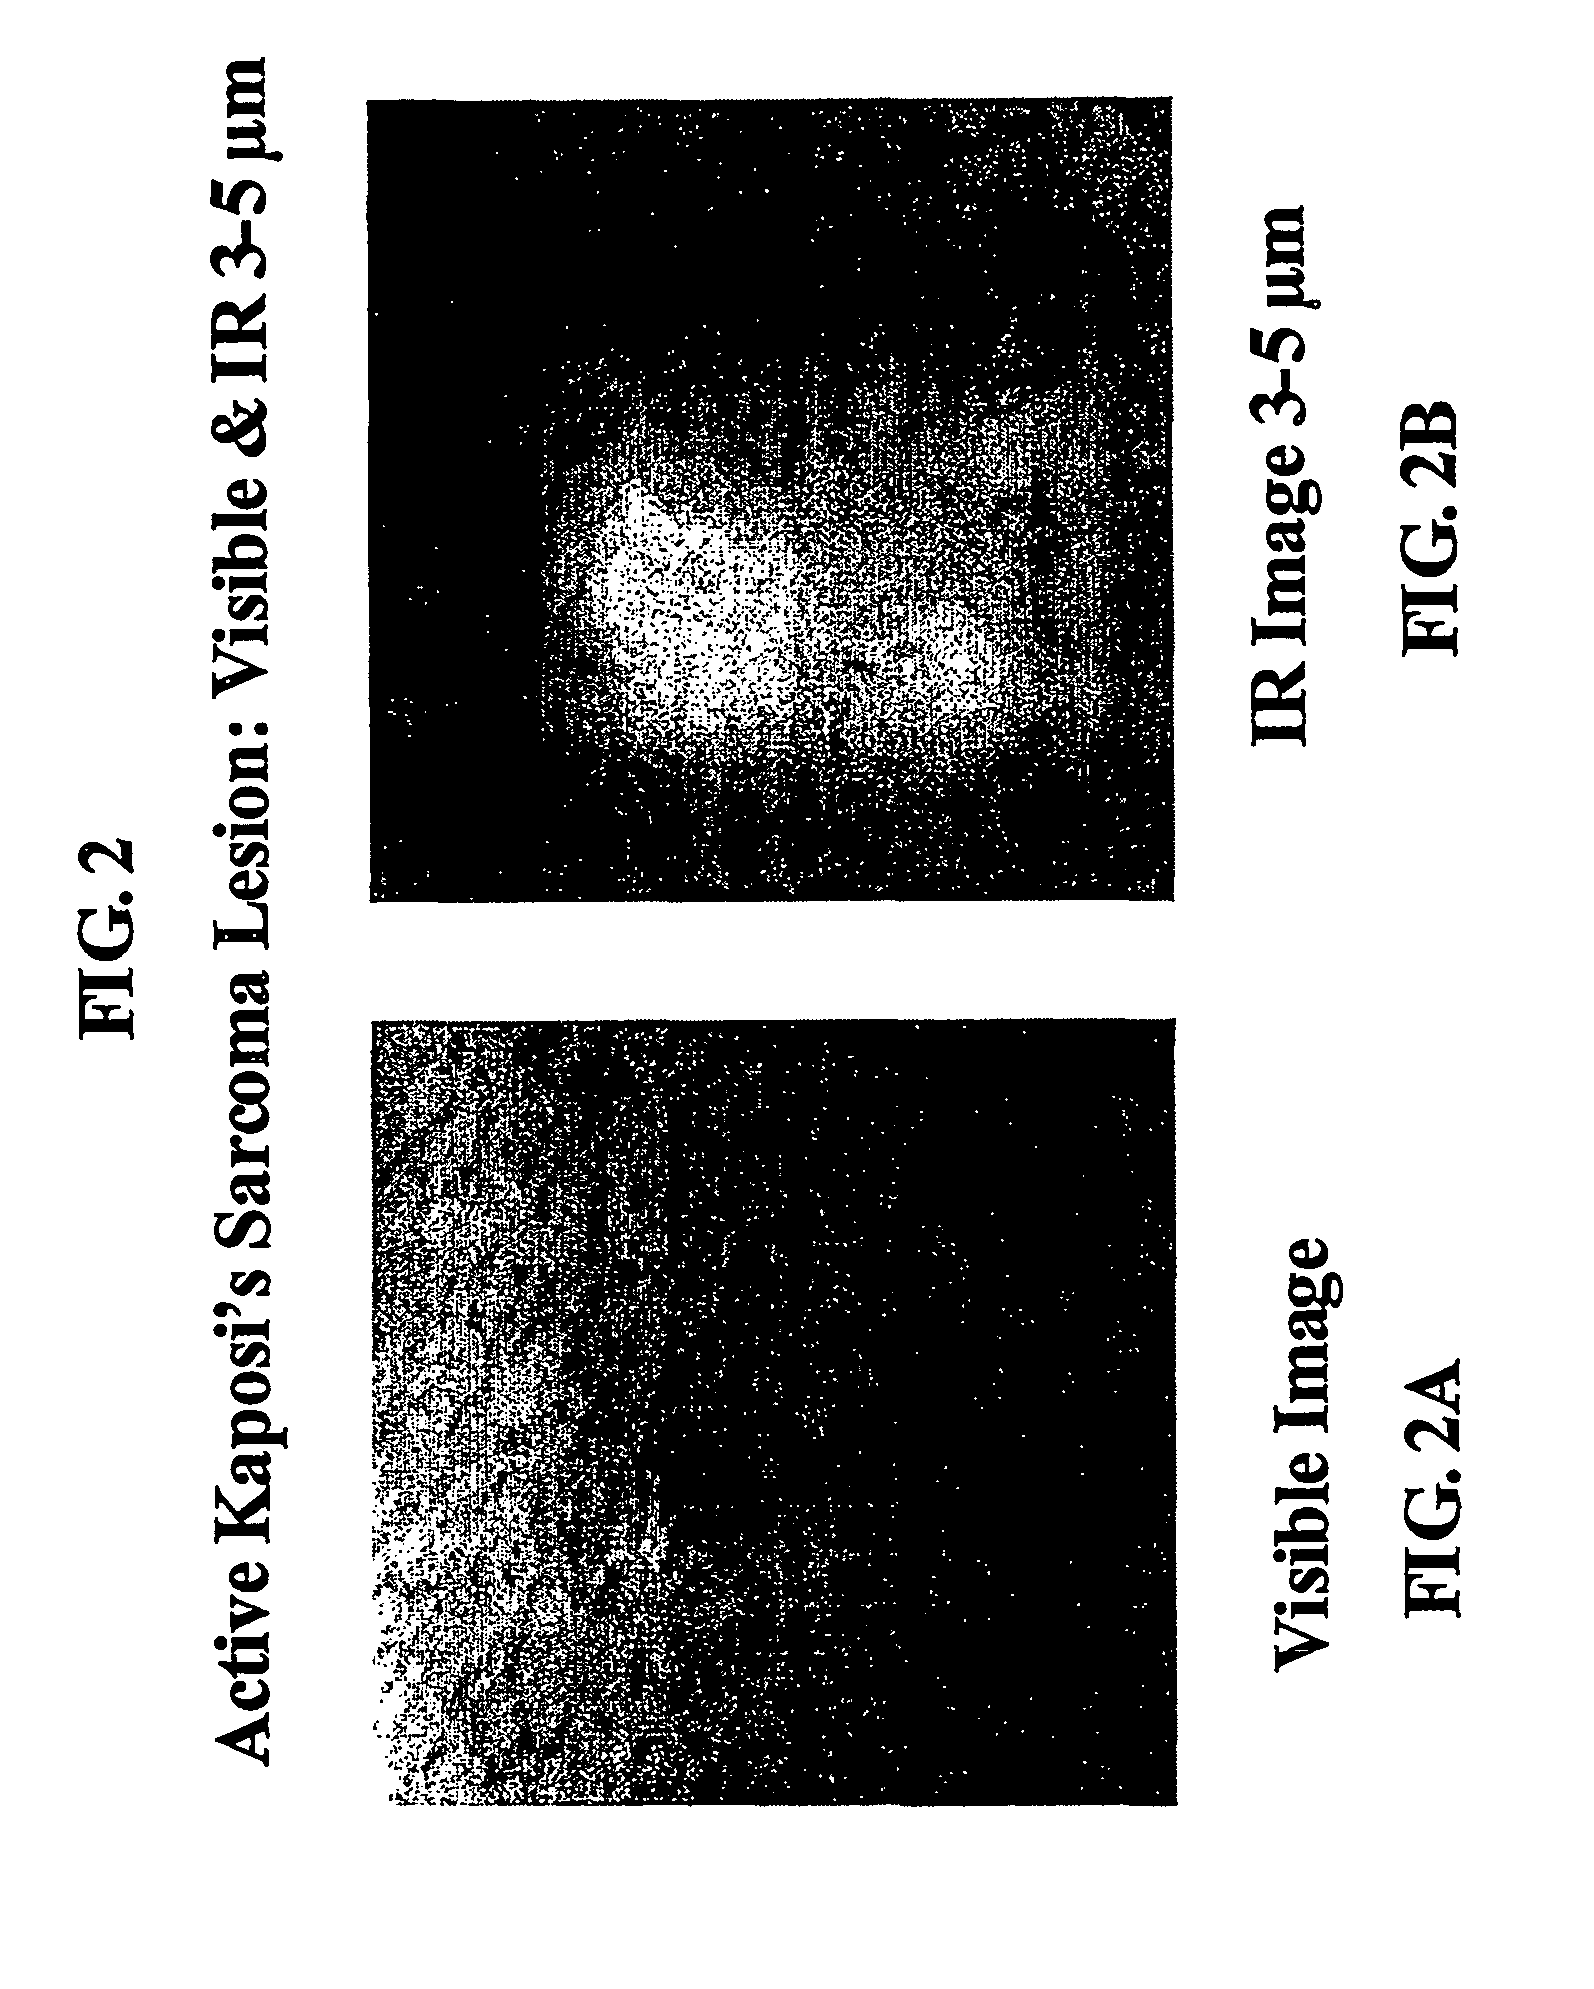 Method for imaging and spectroscopy of tumors and determination of the efficacy of anti-tumor drug therapies